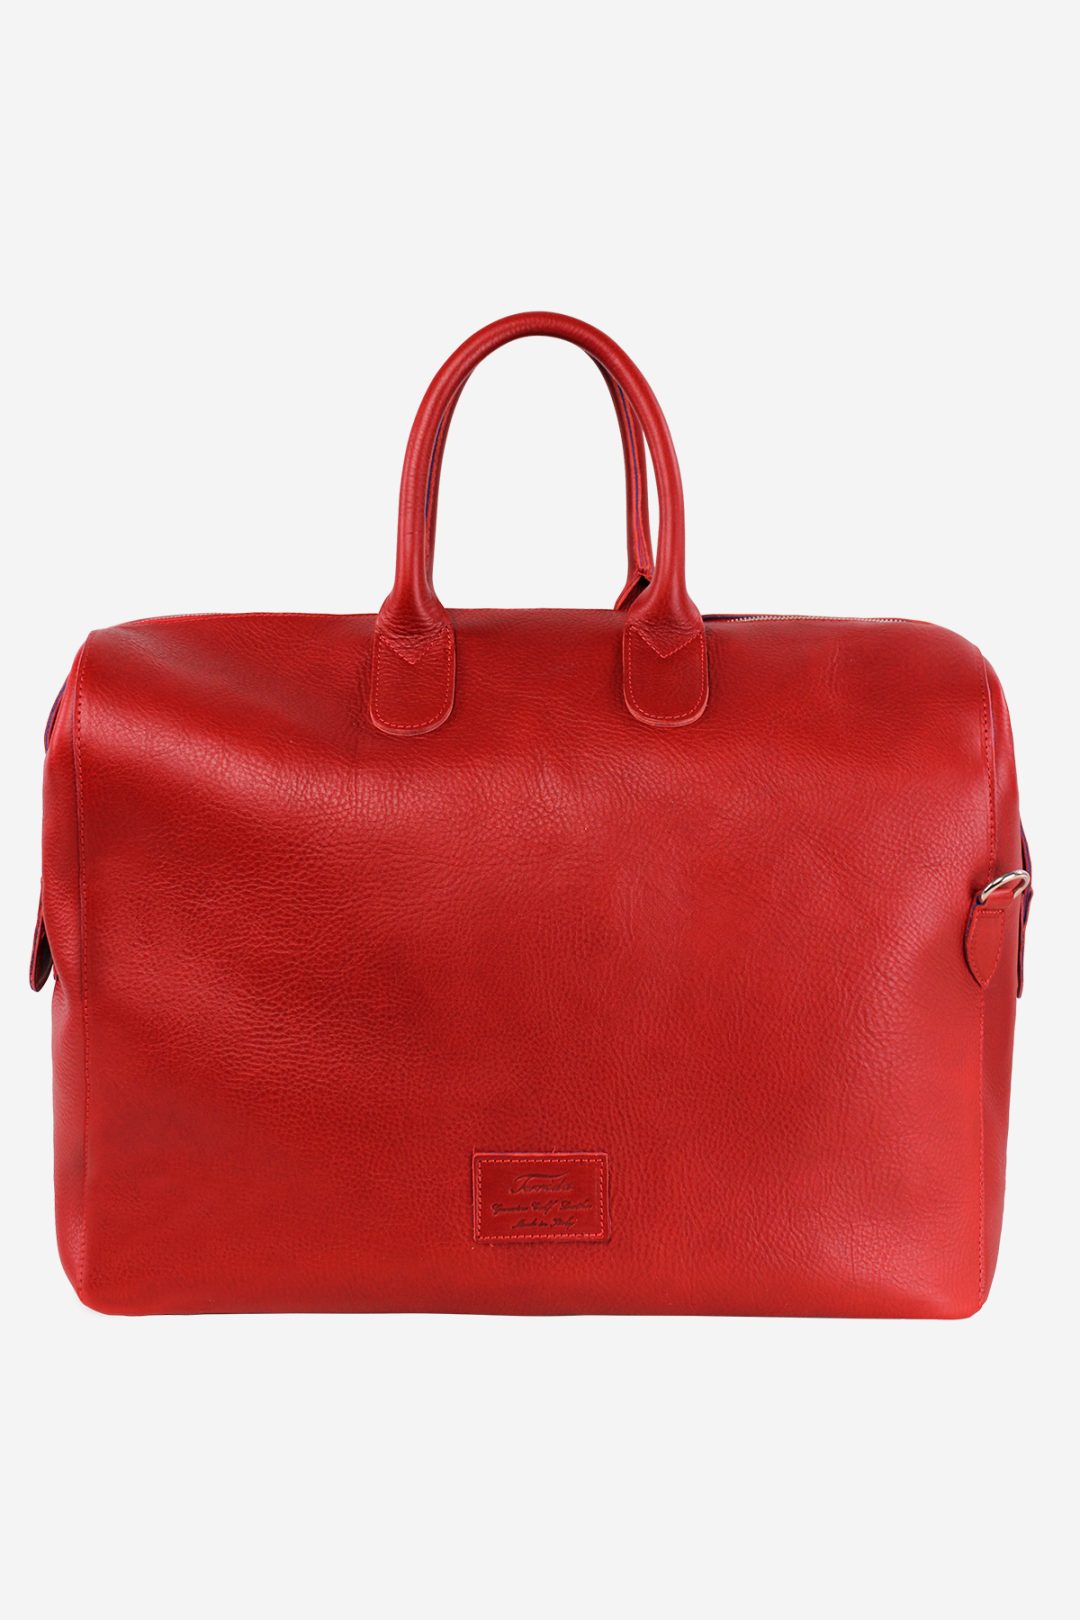 Red Leather Travel Bag Ladies Duffle Leather Weekend Bag 